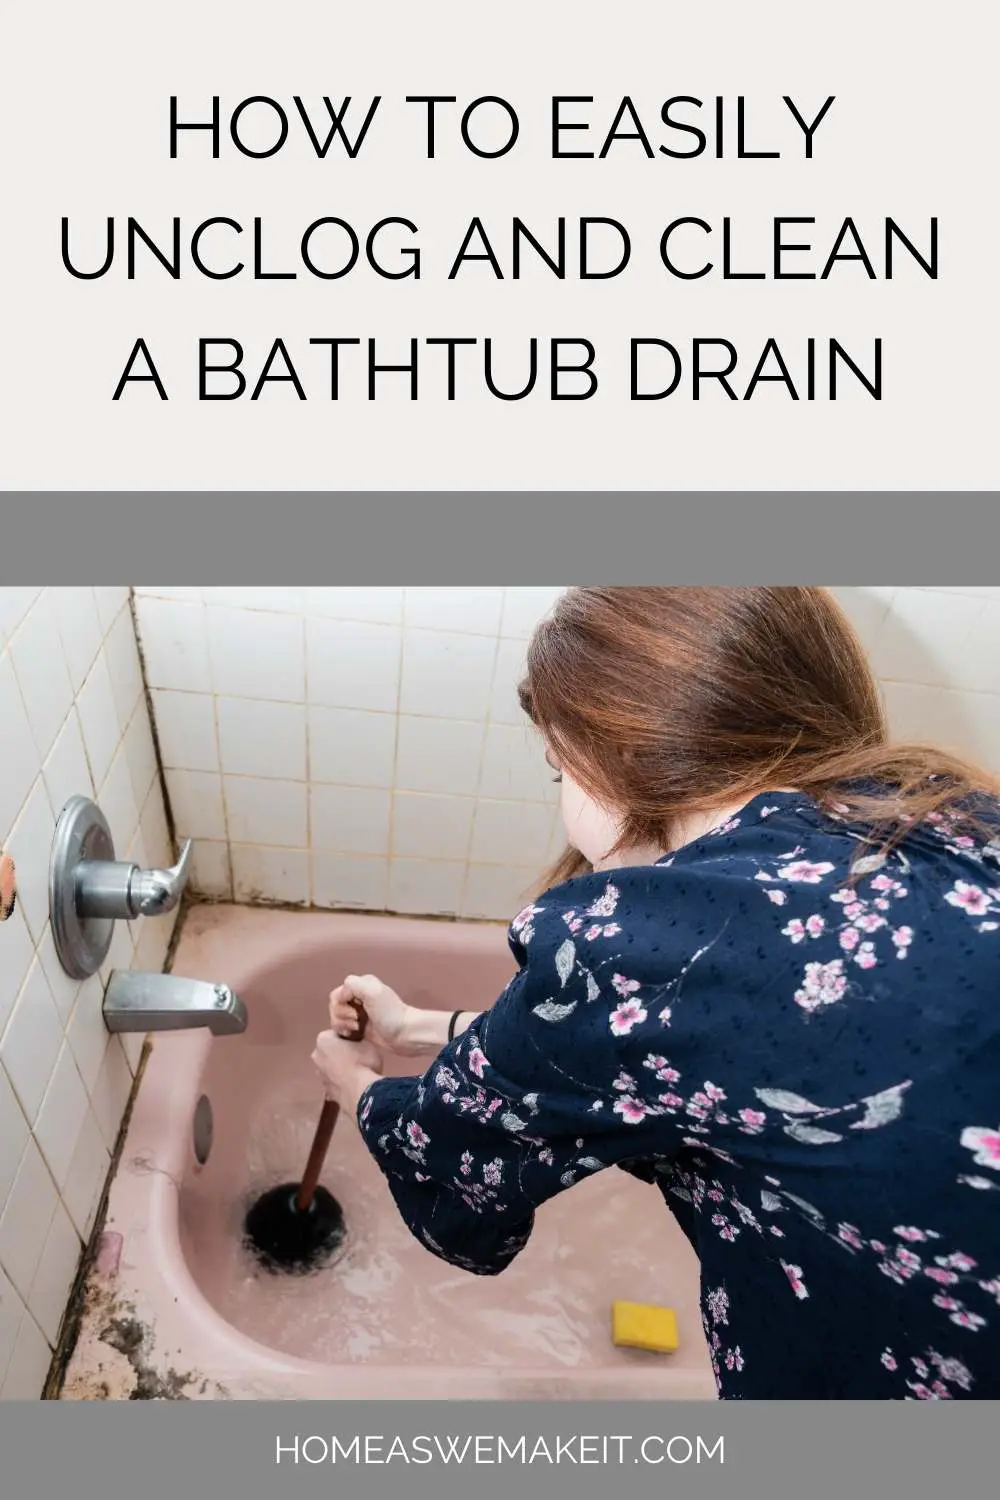 how to unclog and clean a bathtub drain